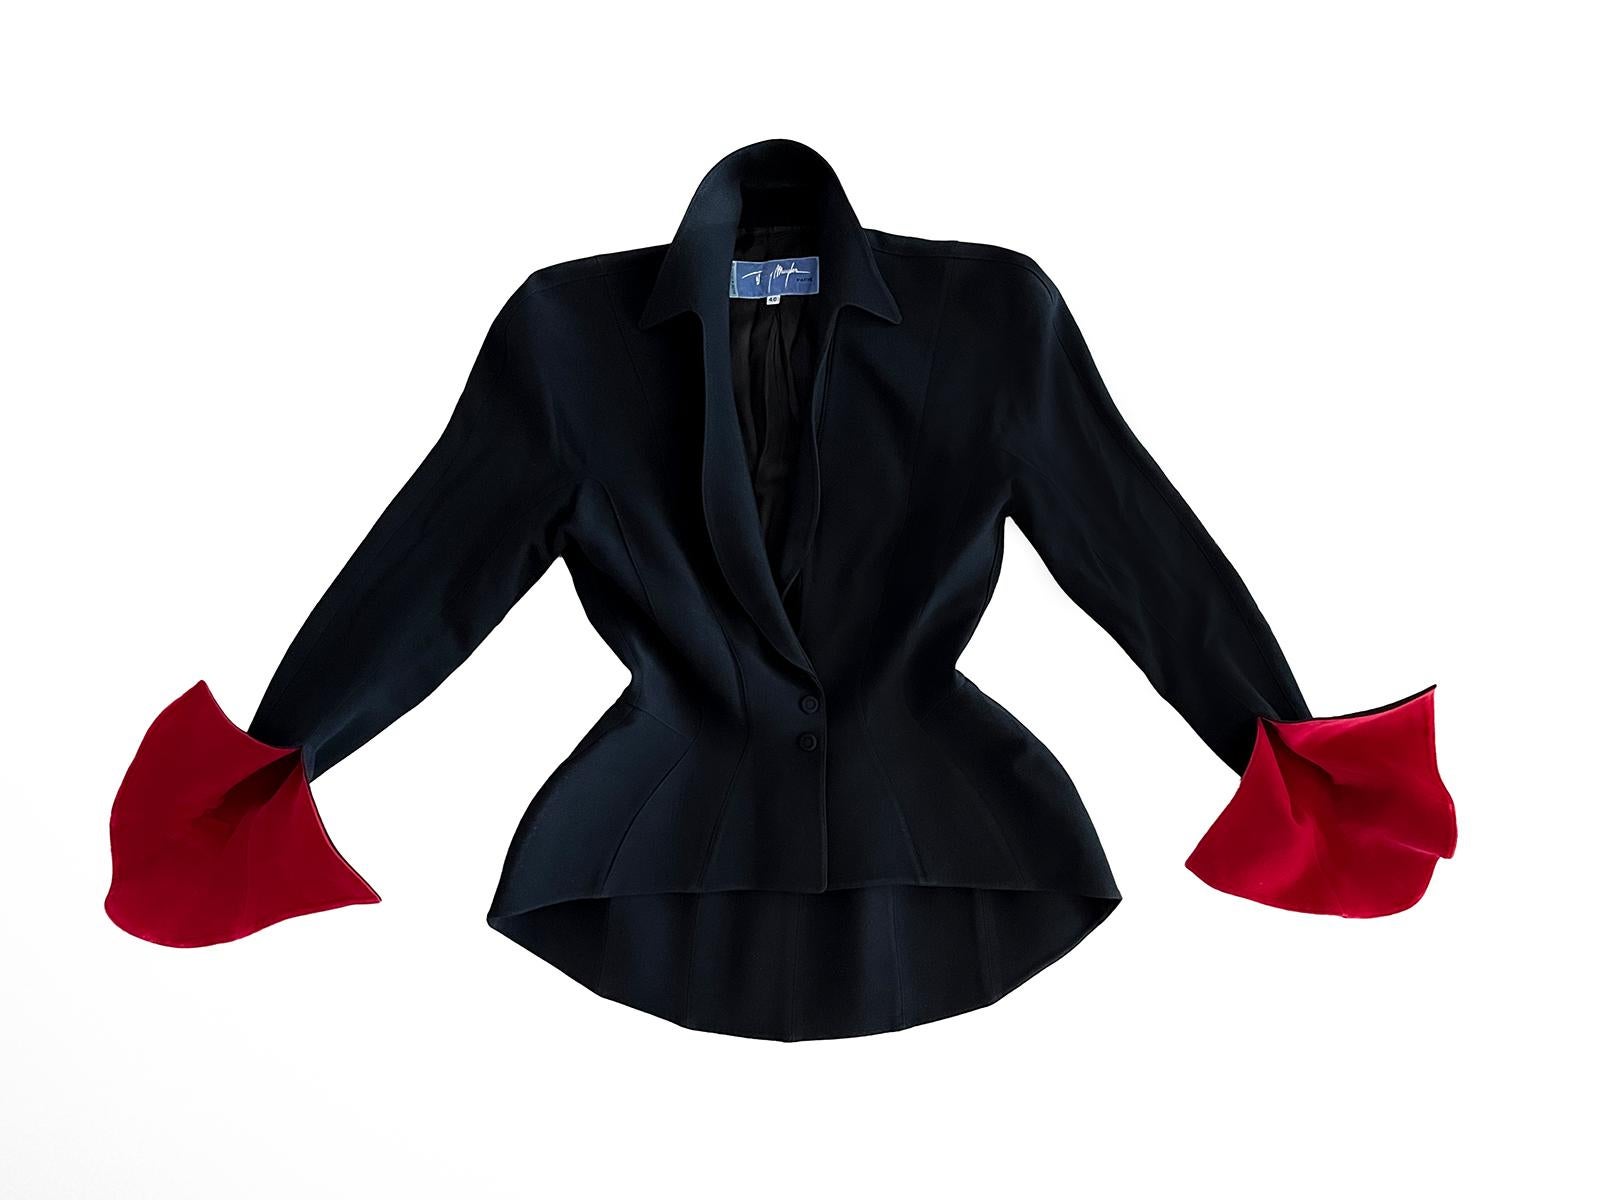 Thierry Mugler FW 1997 Black Jacket with Dramatic Red Velvet Sleeves For Sale 4